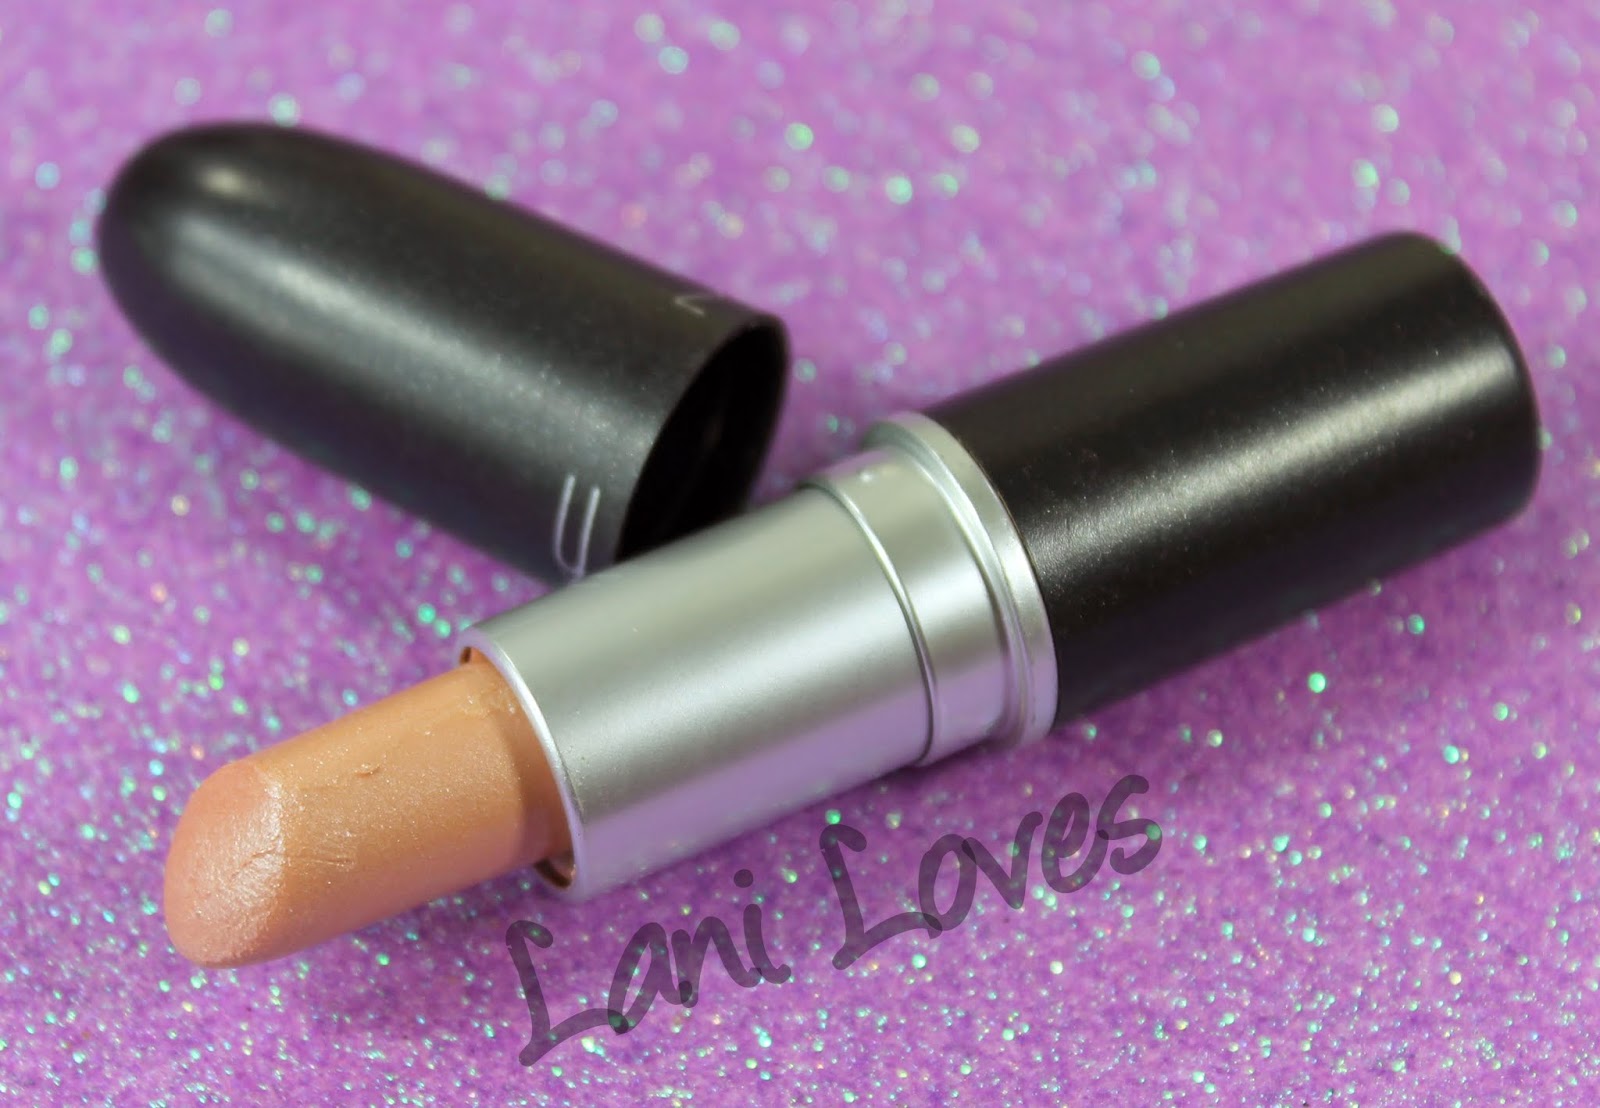 MAC Monday: Fab Florals - Budlette Lipstick Swatches and Review